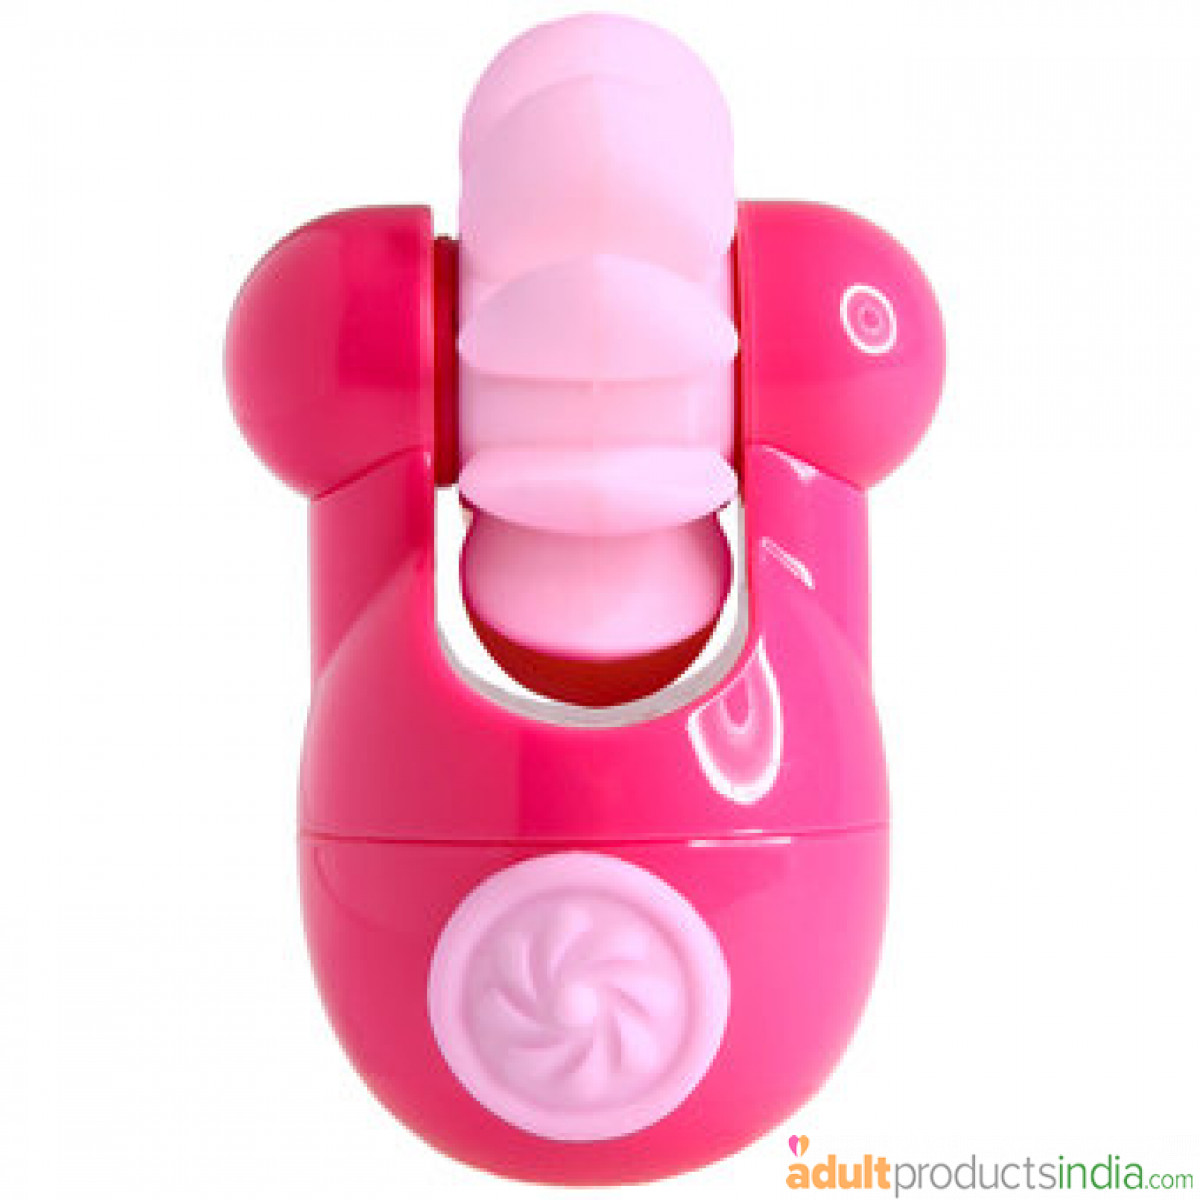 Sqweel Go Rechargeable Oral Sex Massager - Pink